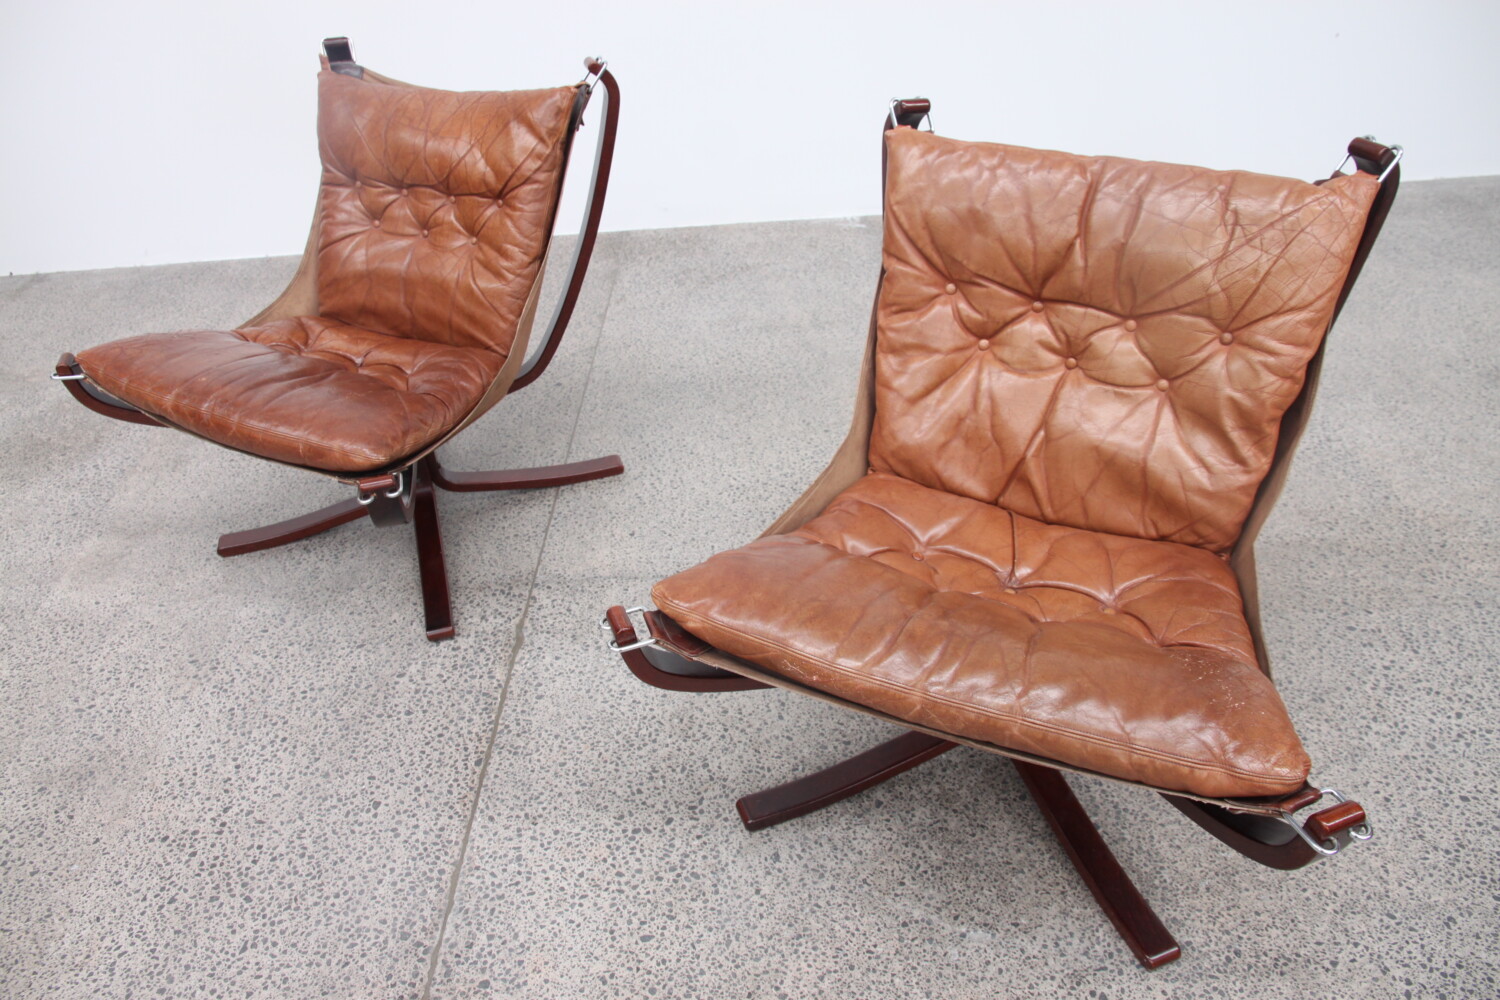 Falcon chairs